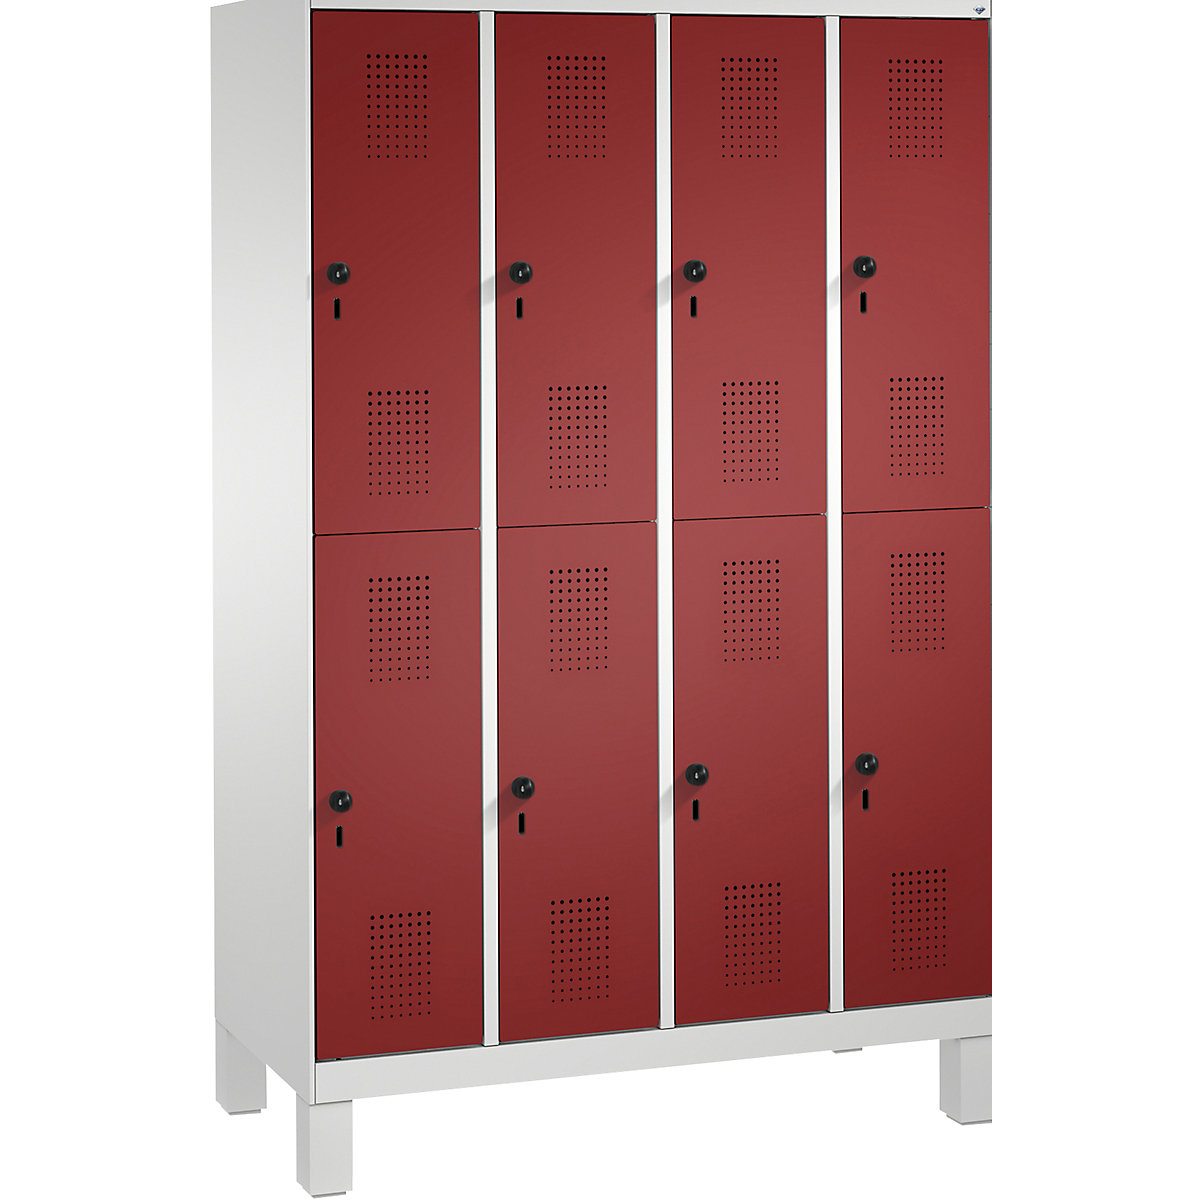 EVOLO cloakroom locker, double tier, with feet – C+P, 4 compartments, 2 shelf compartments each, compartment width 300 mm, light grey / ruby red-10